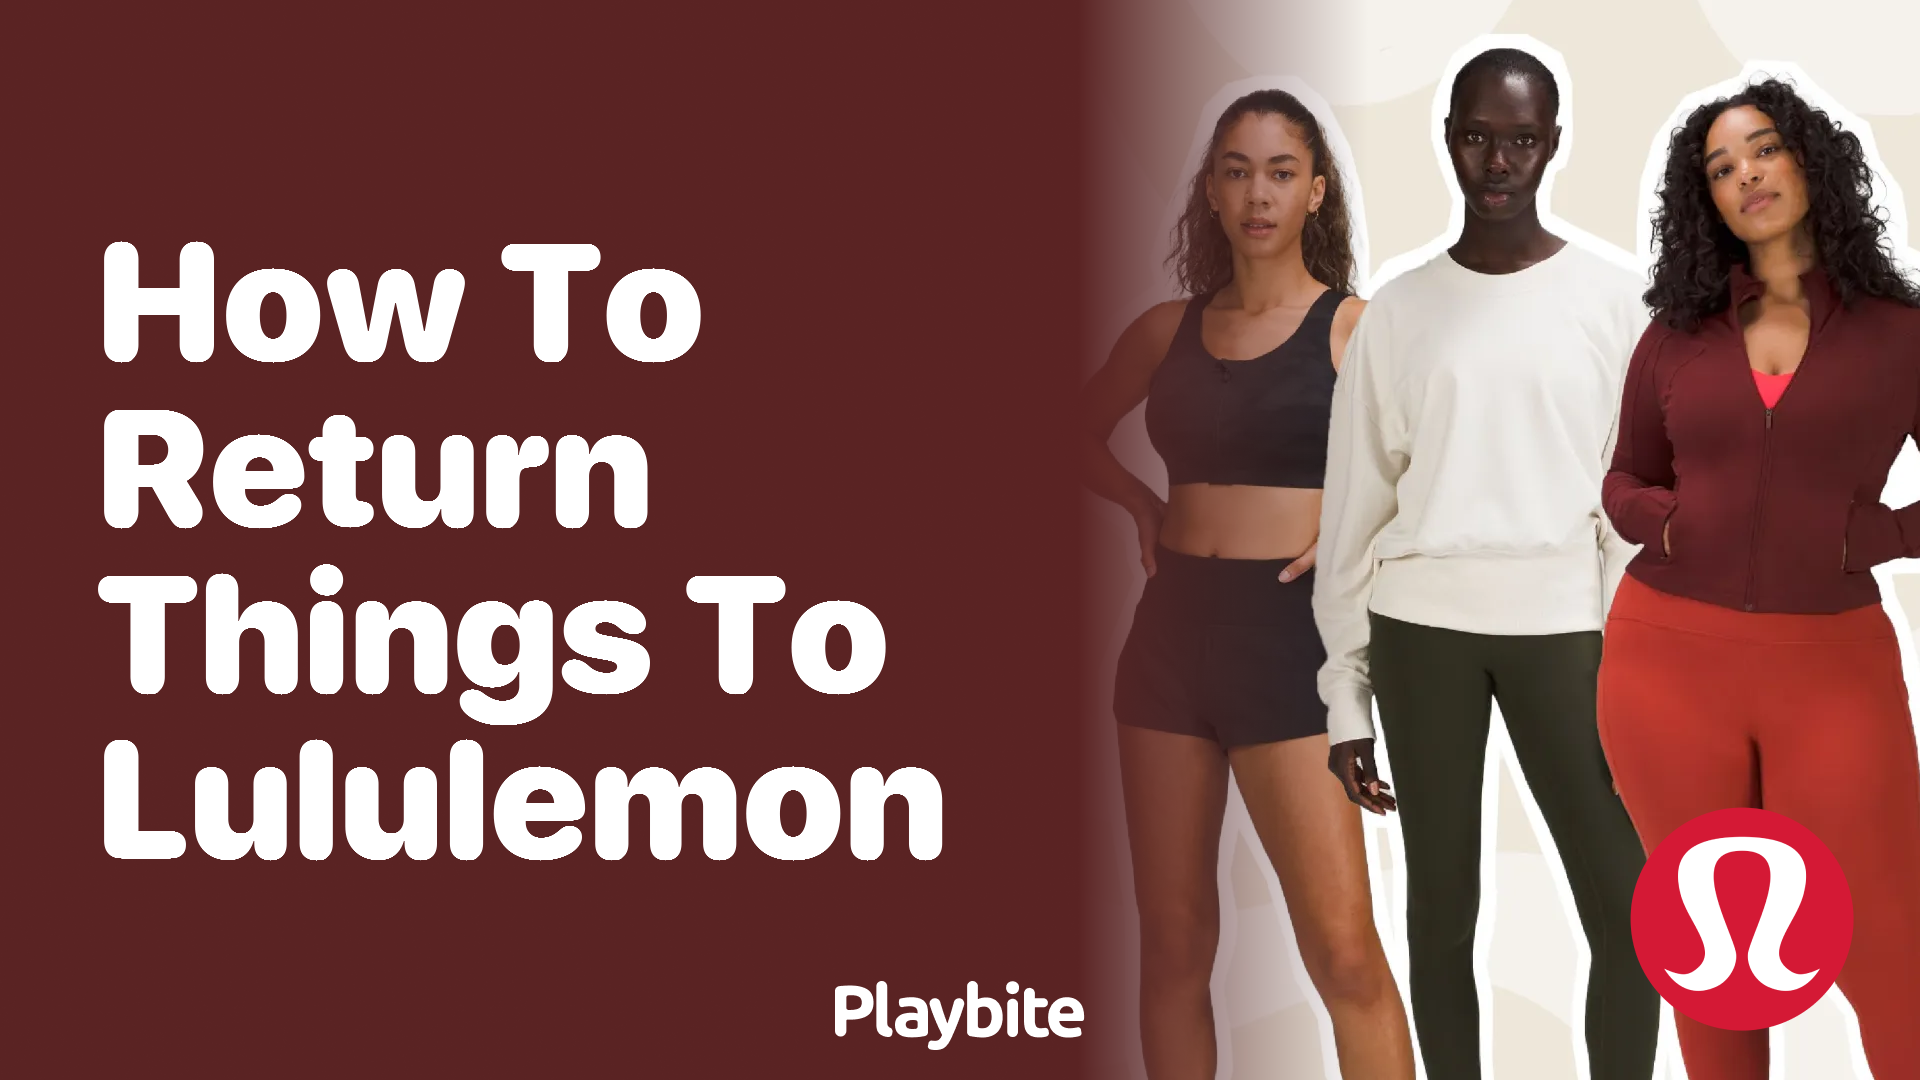 How to Return Things to Lululemon: A Simple Guide